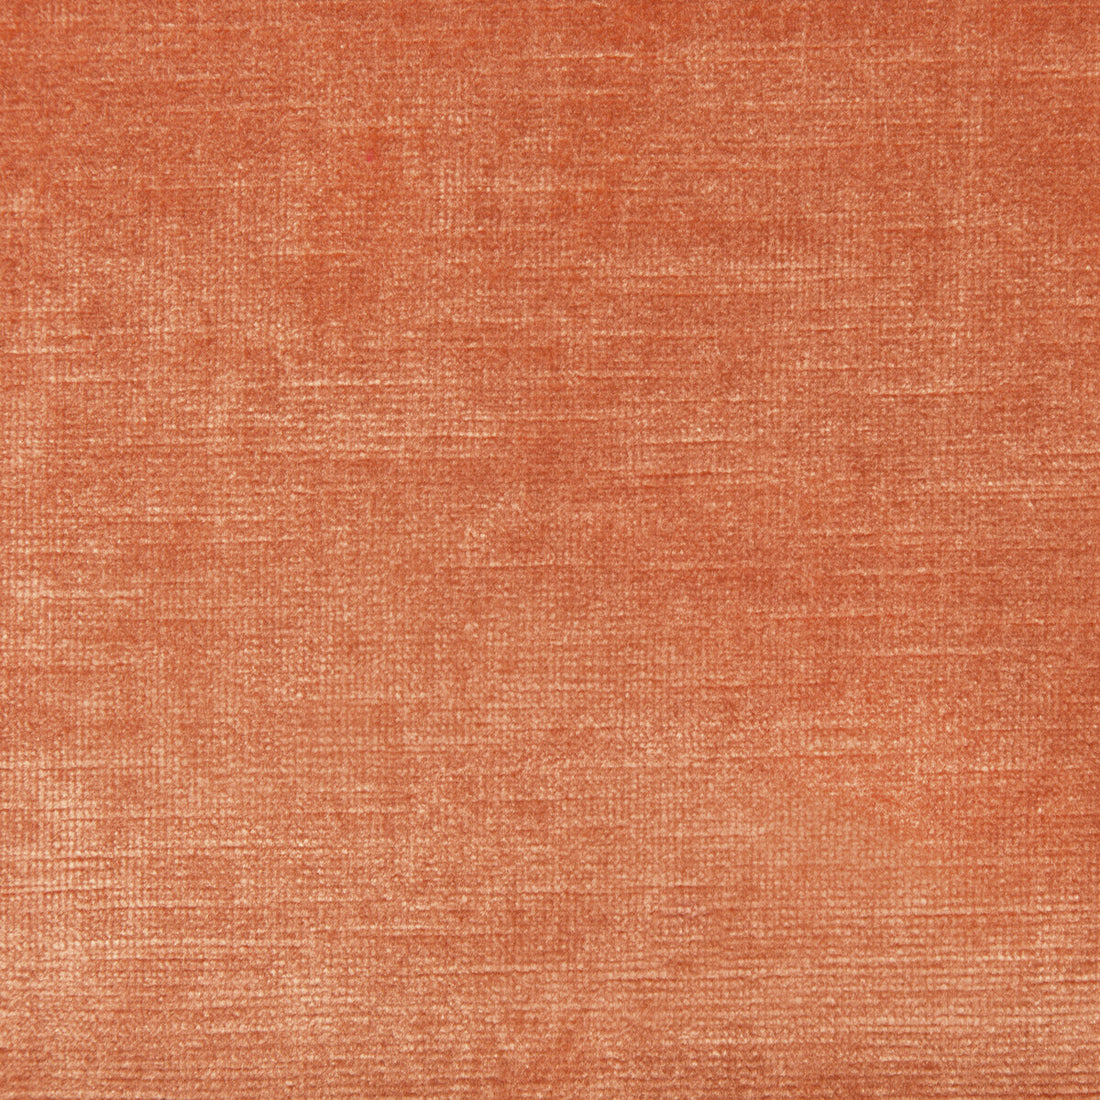 Venetian fabric in coral color - pattern 31326.120.0 - by Kravet Design